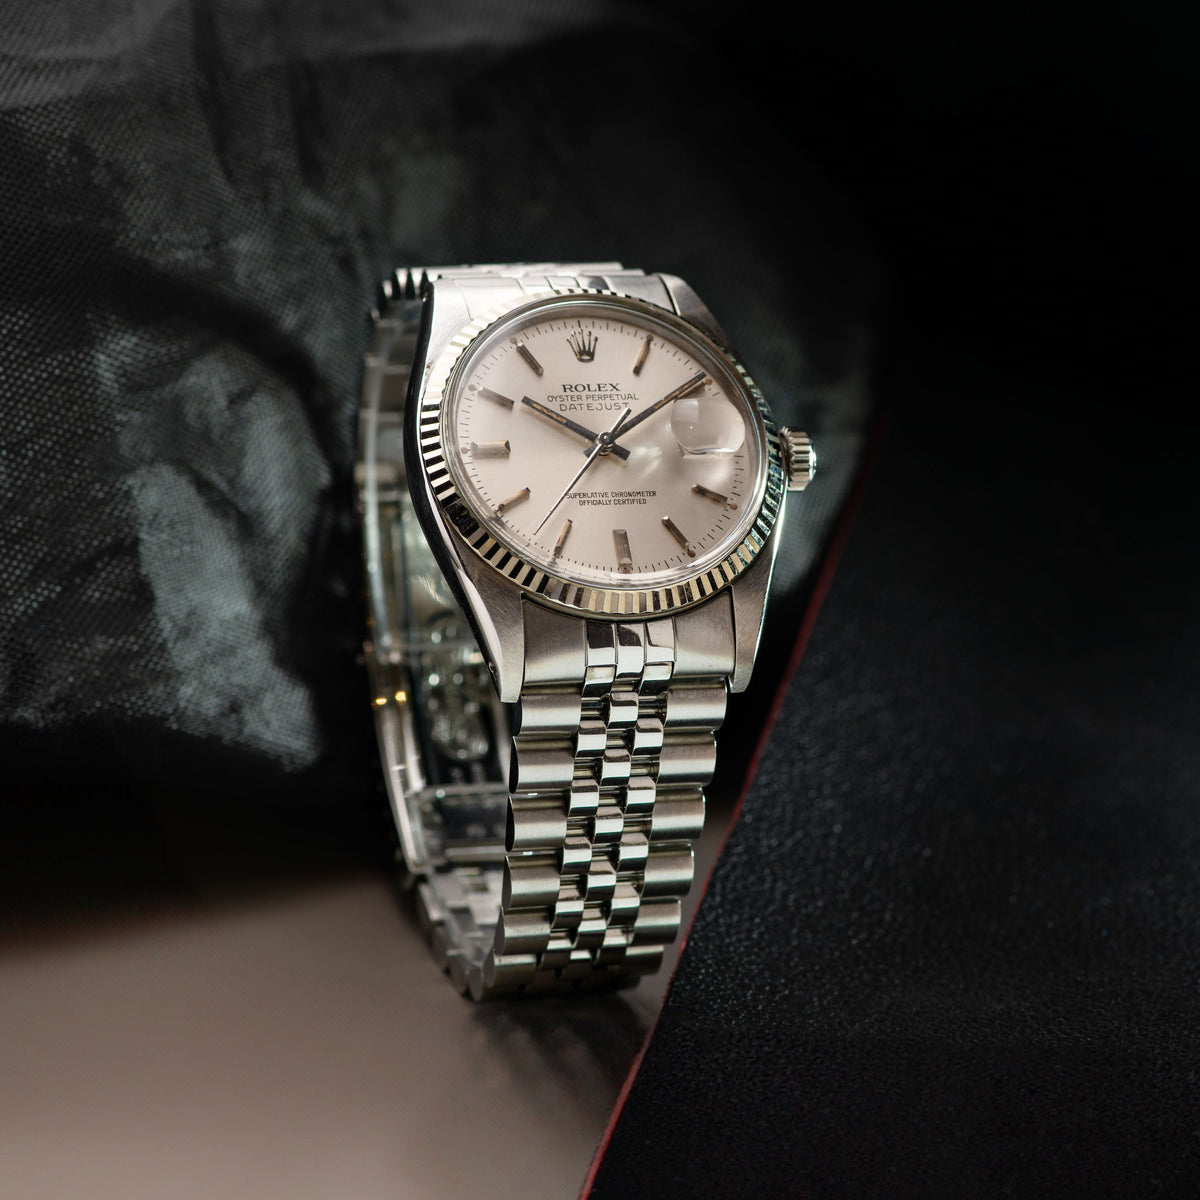 1979 Rolex Datejust New Old Stock Ref. 16014 (with Papers)